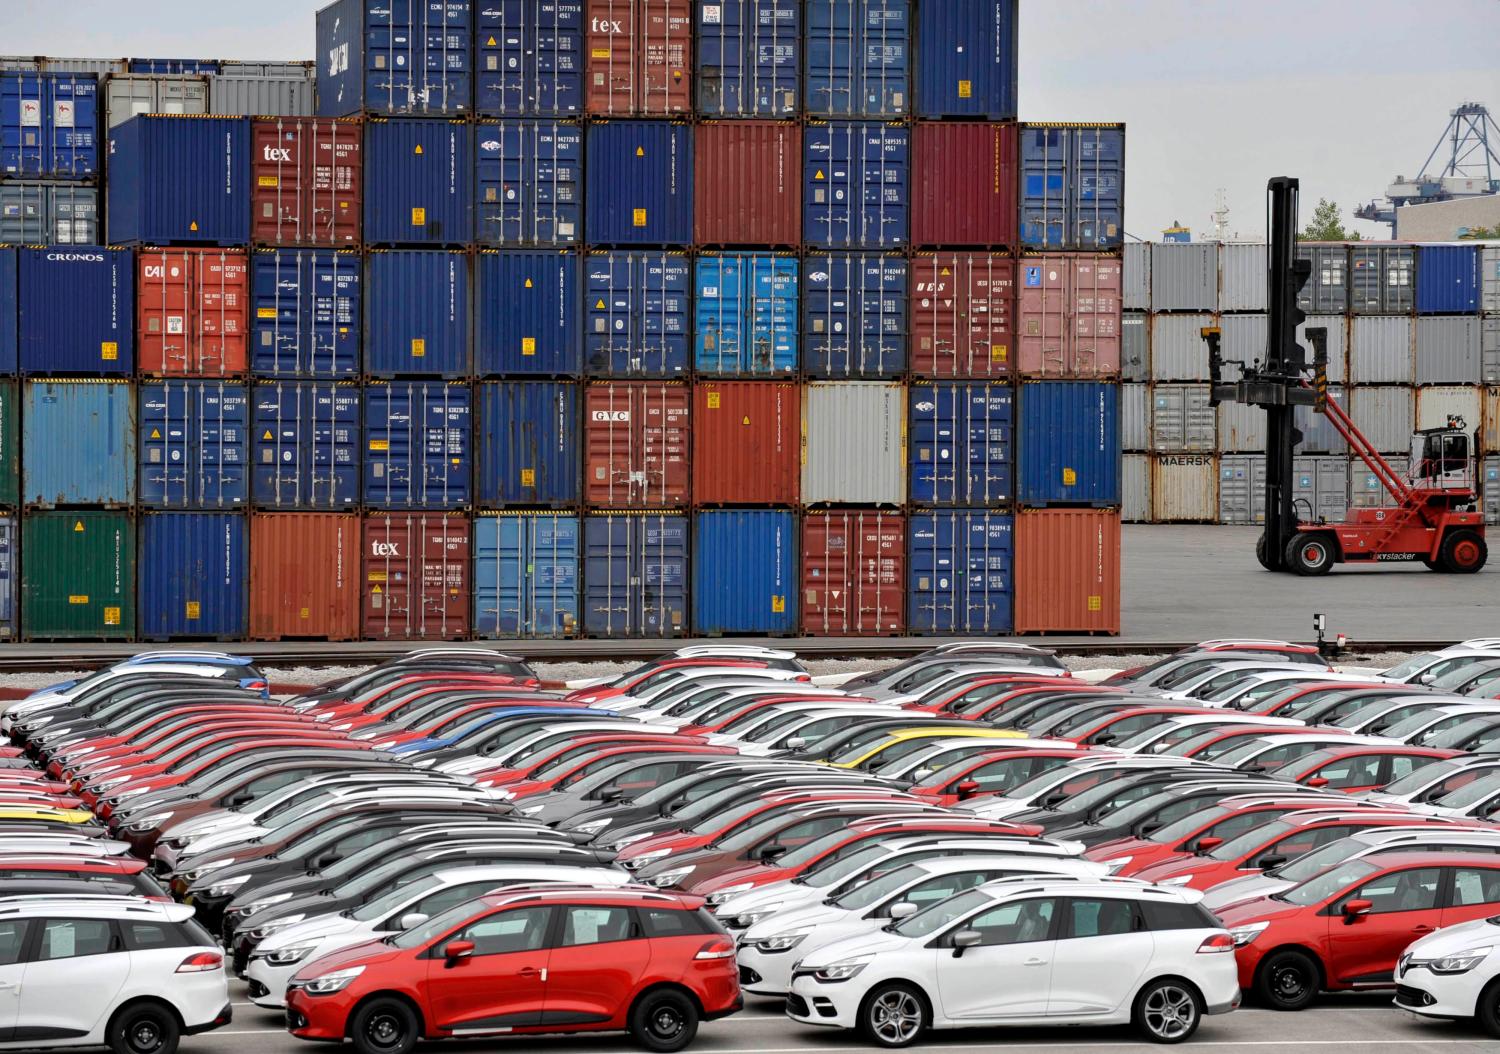 Renault cars produced in Turkey and awaiting export throughout Europe, are lined-up in front of ship containers in the port of Koper October 14, 2013. Automotive industry association ACEA said October 16, 2013, that new car registrations in Europe climbed 5.5 percent to 1.19 million vehicles in September, only the third month a gain was recorded in the past two years. But within the European Union, the level of demand was the second lowest on record for the month of September since it began tabulating results for the 27 member states in 2003. Picture taken October 14. REUTERS/Srdjan Zivulovic (SLOVENIA - Tags: TRANSPORT BUSINESS) - BM2E9AF0WYI01